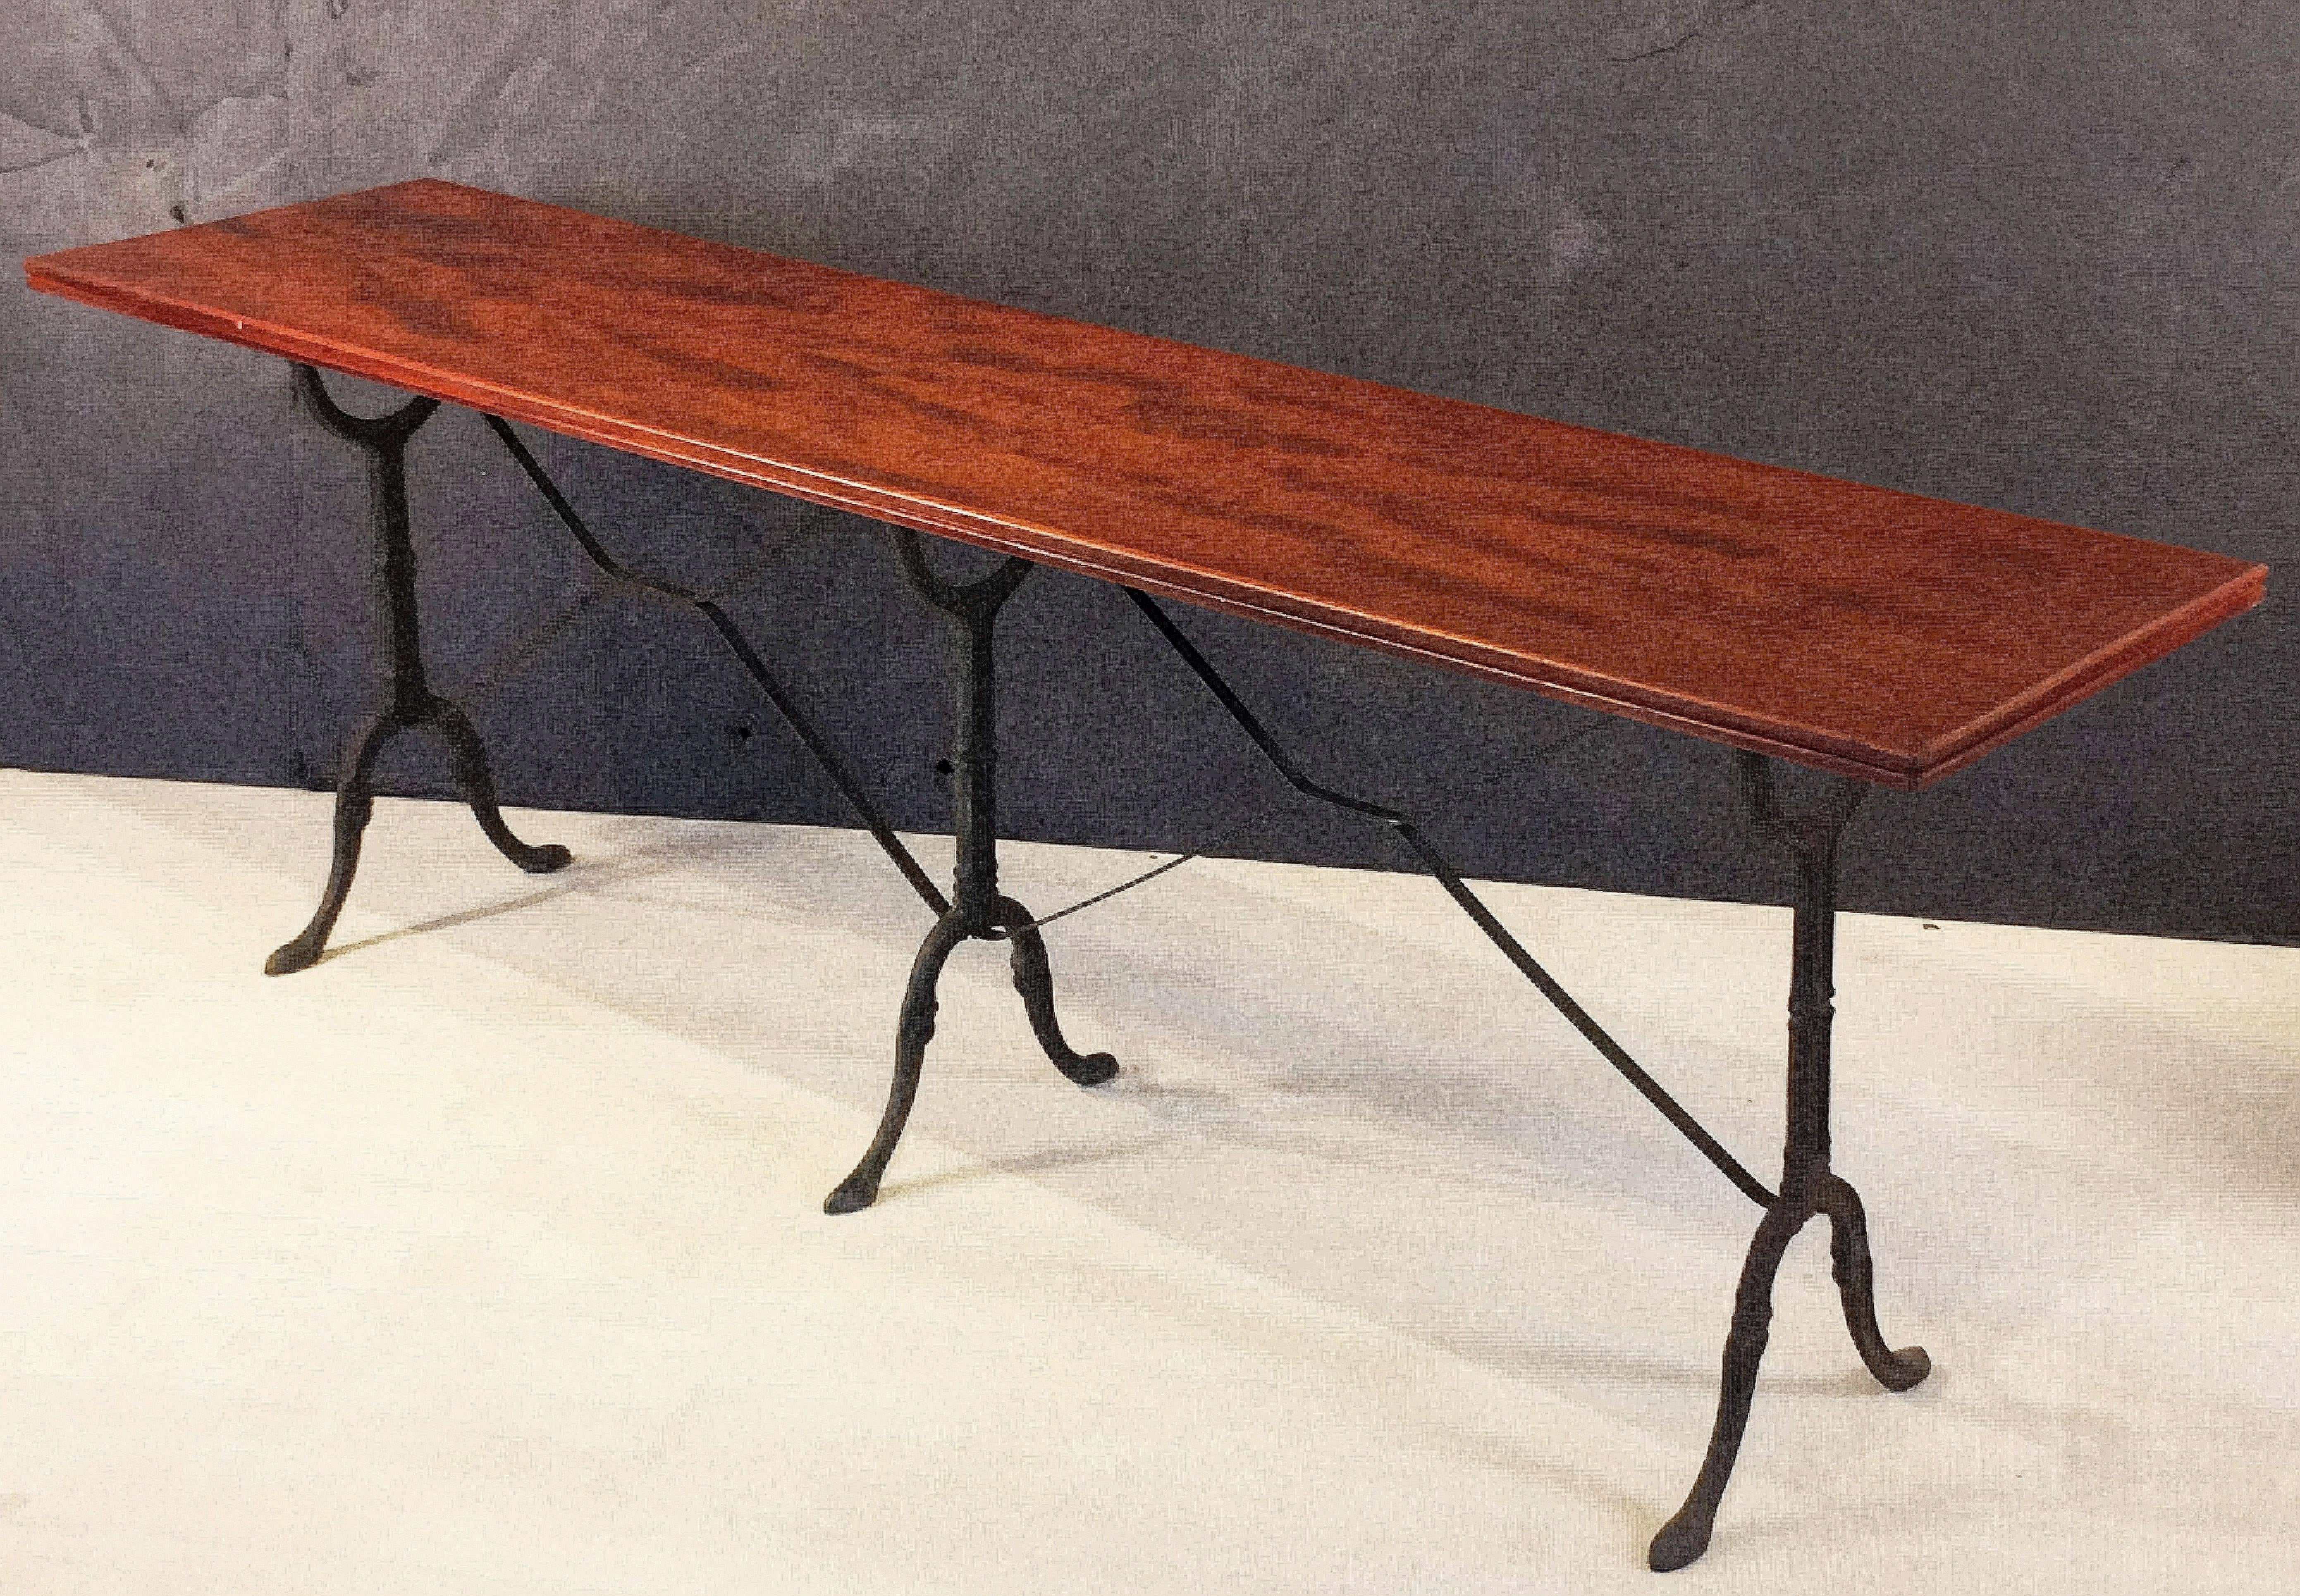 A fine English pub or bistro console table, featuring a moulded rectangular wooden top, set upon a cast iron base with fine scroll work and sturdy feet.

Great as a garden table or serving table!